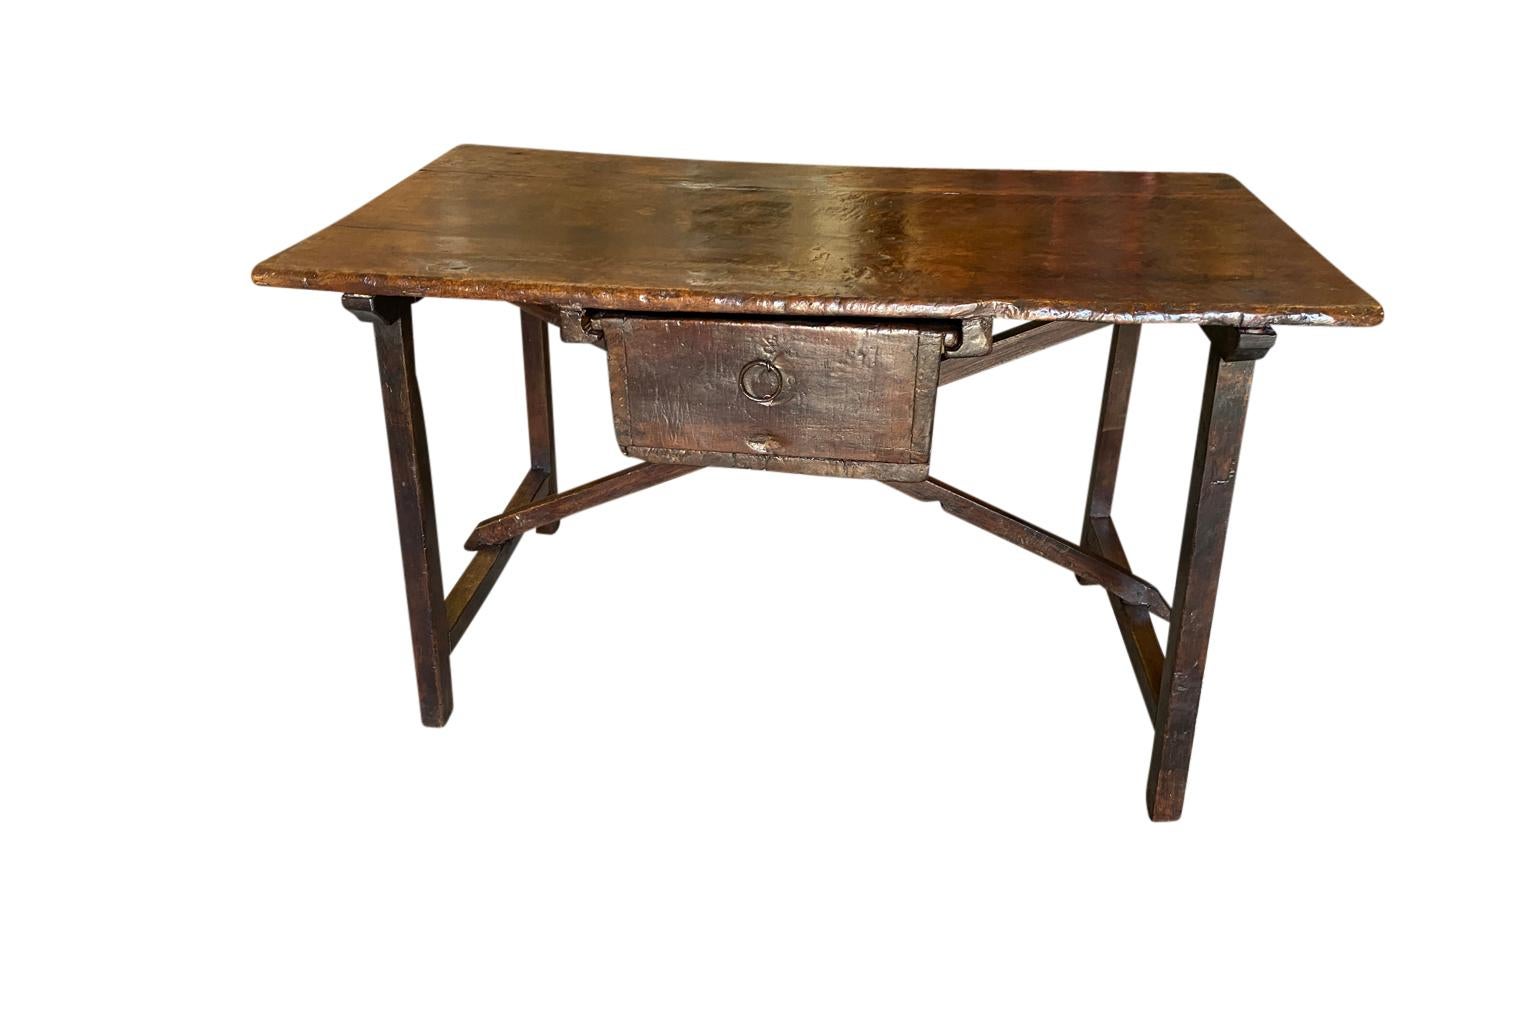 A very beautiful 17th century Writing Table - Side Table from the Piedmont region of Italy.  Wonderfully constructed from walnut with a single drawer and cross stretchers.  A minimalist design with outstanding patina - rich and luminous.